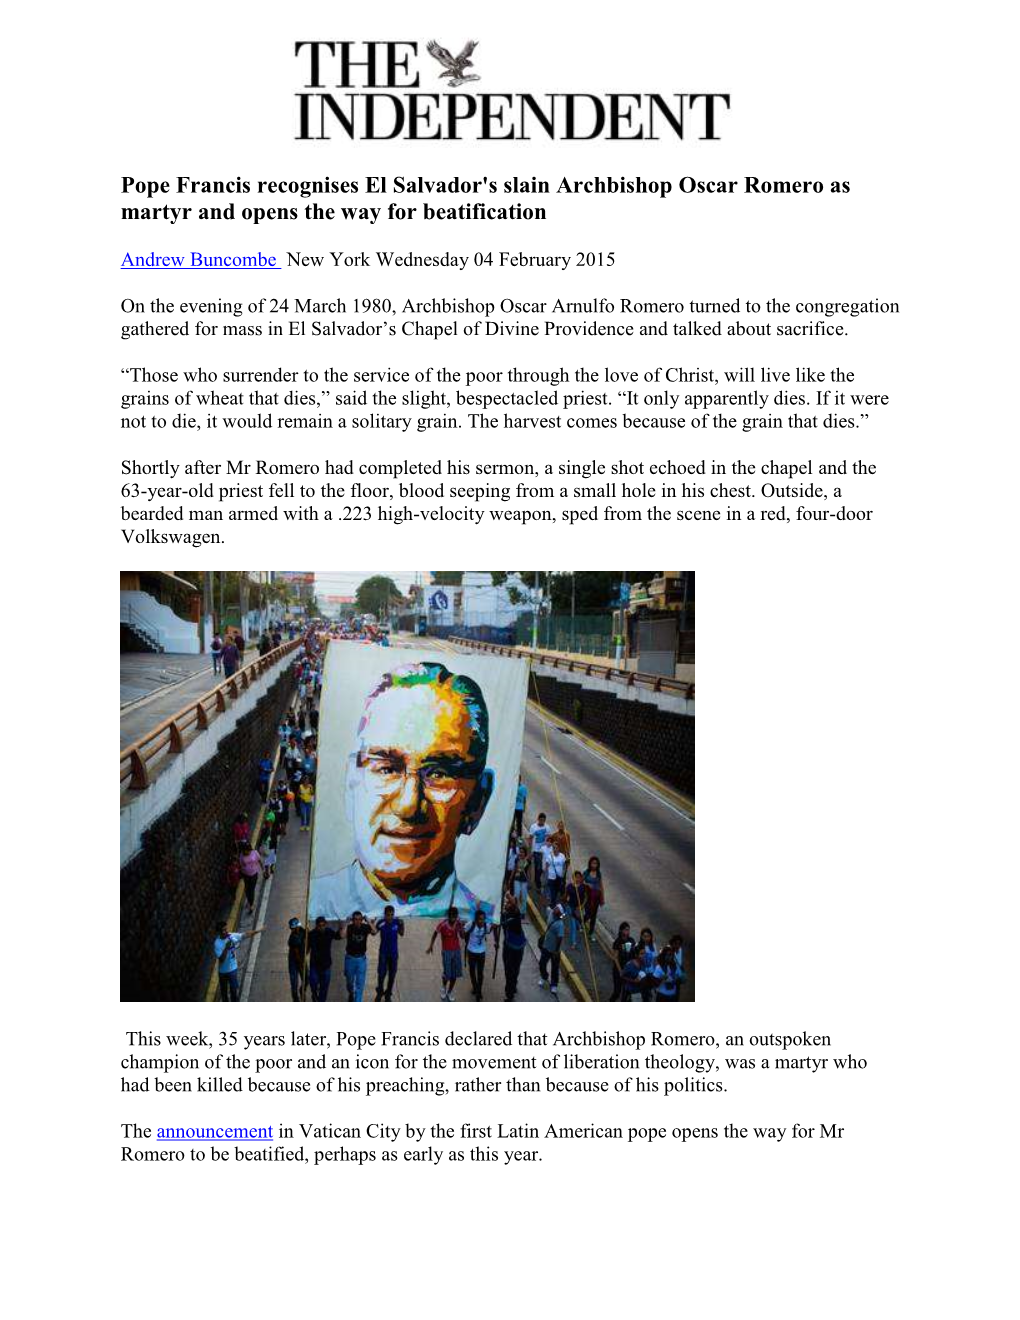 Pope Francis Recognises El Salvador's Slain Archbishop Oscar Romero As Martyr and Opens the Way for Beatification